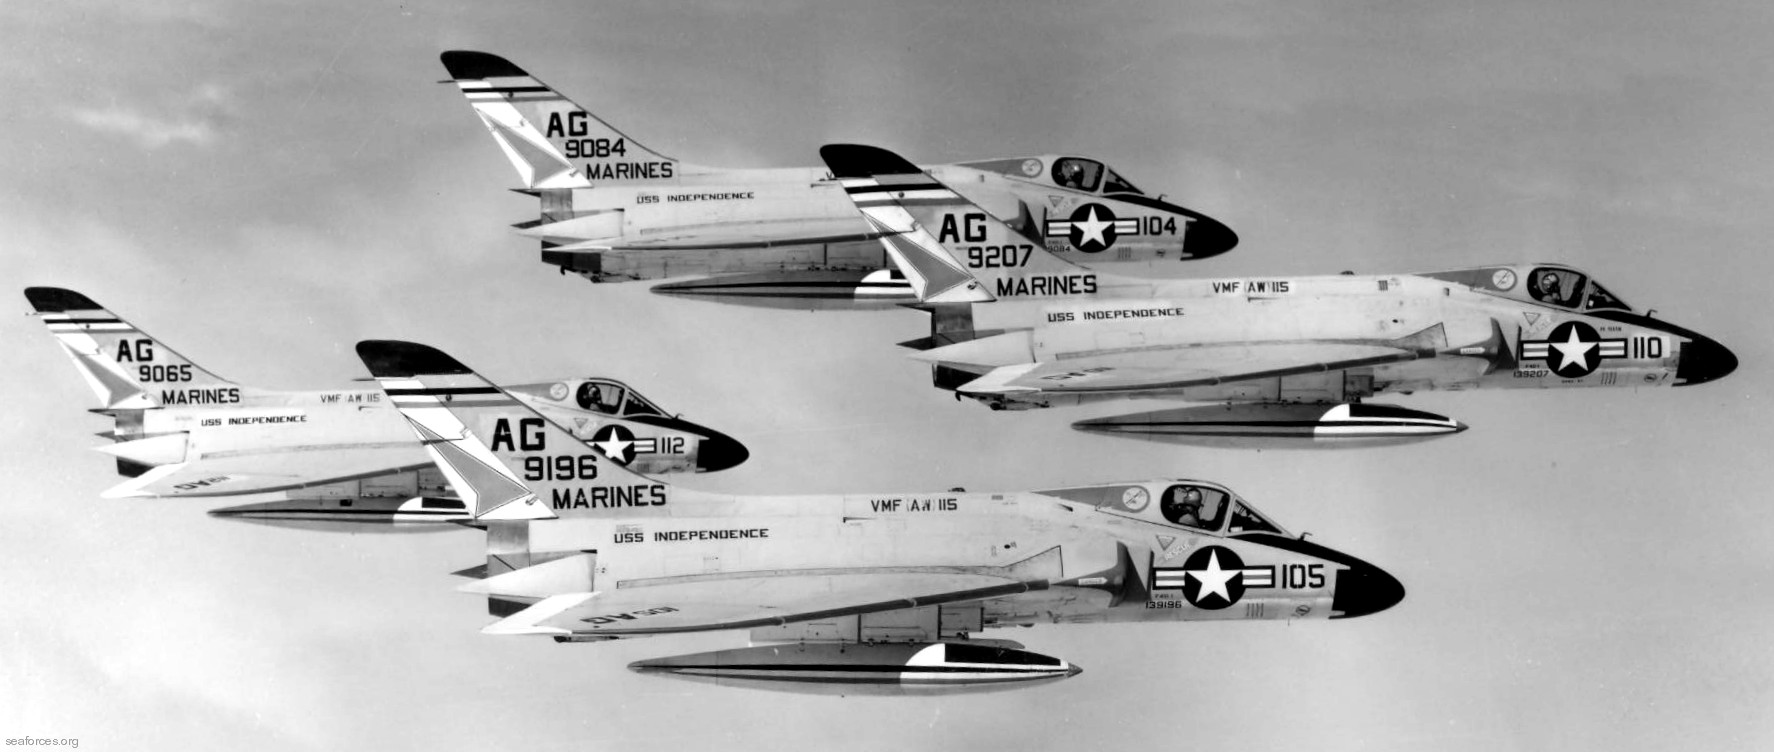 vmf(aw)-115 silver eagles marine fighter attack squadron f4d-1 skyray cvg-7 uss independence cva-62 86